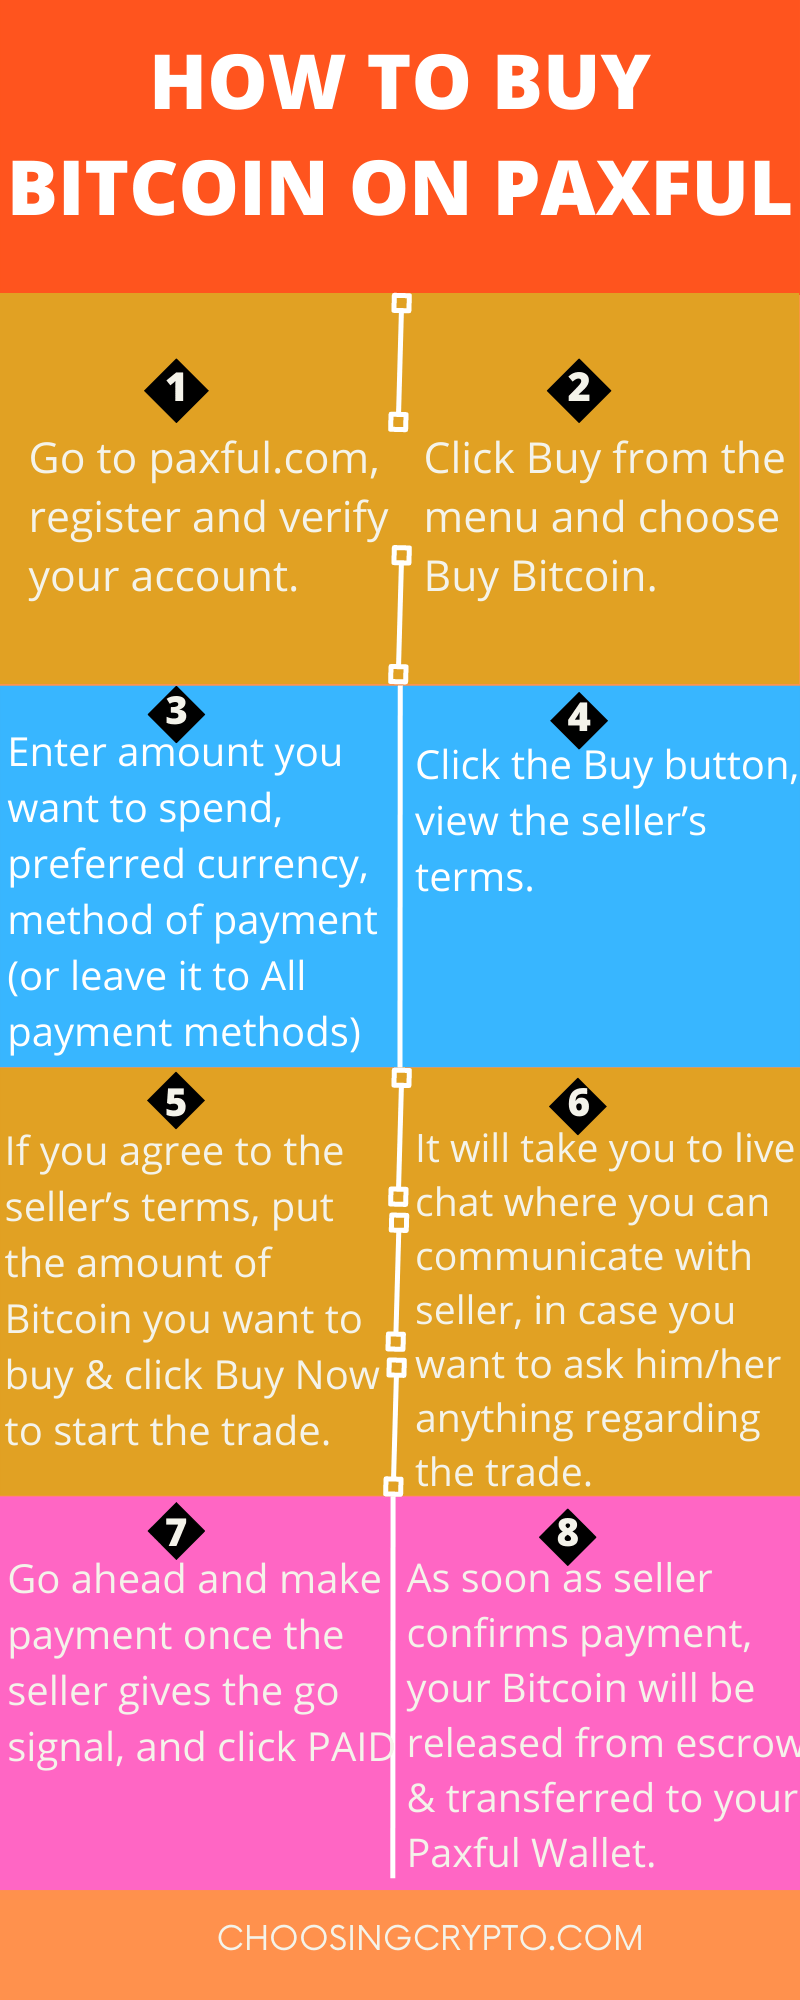 How To Buy Bitcoin on Payful